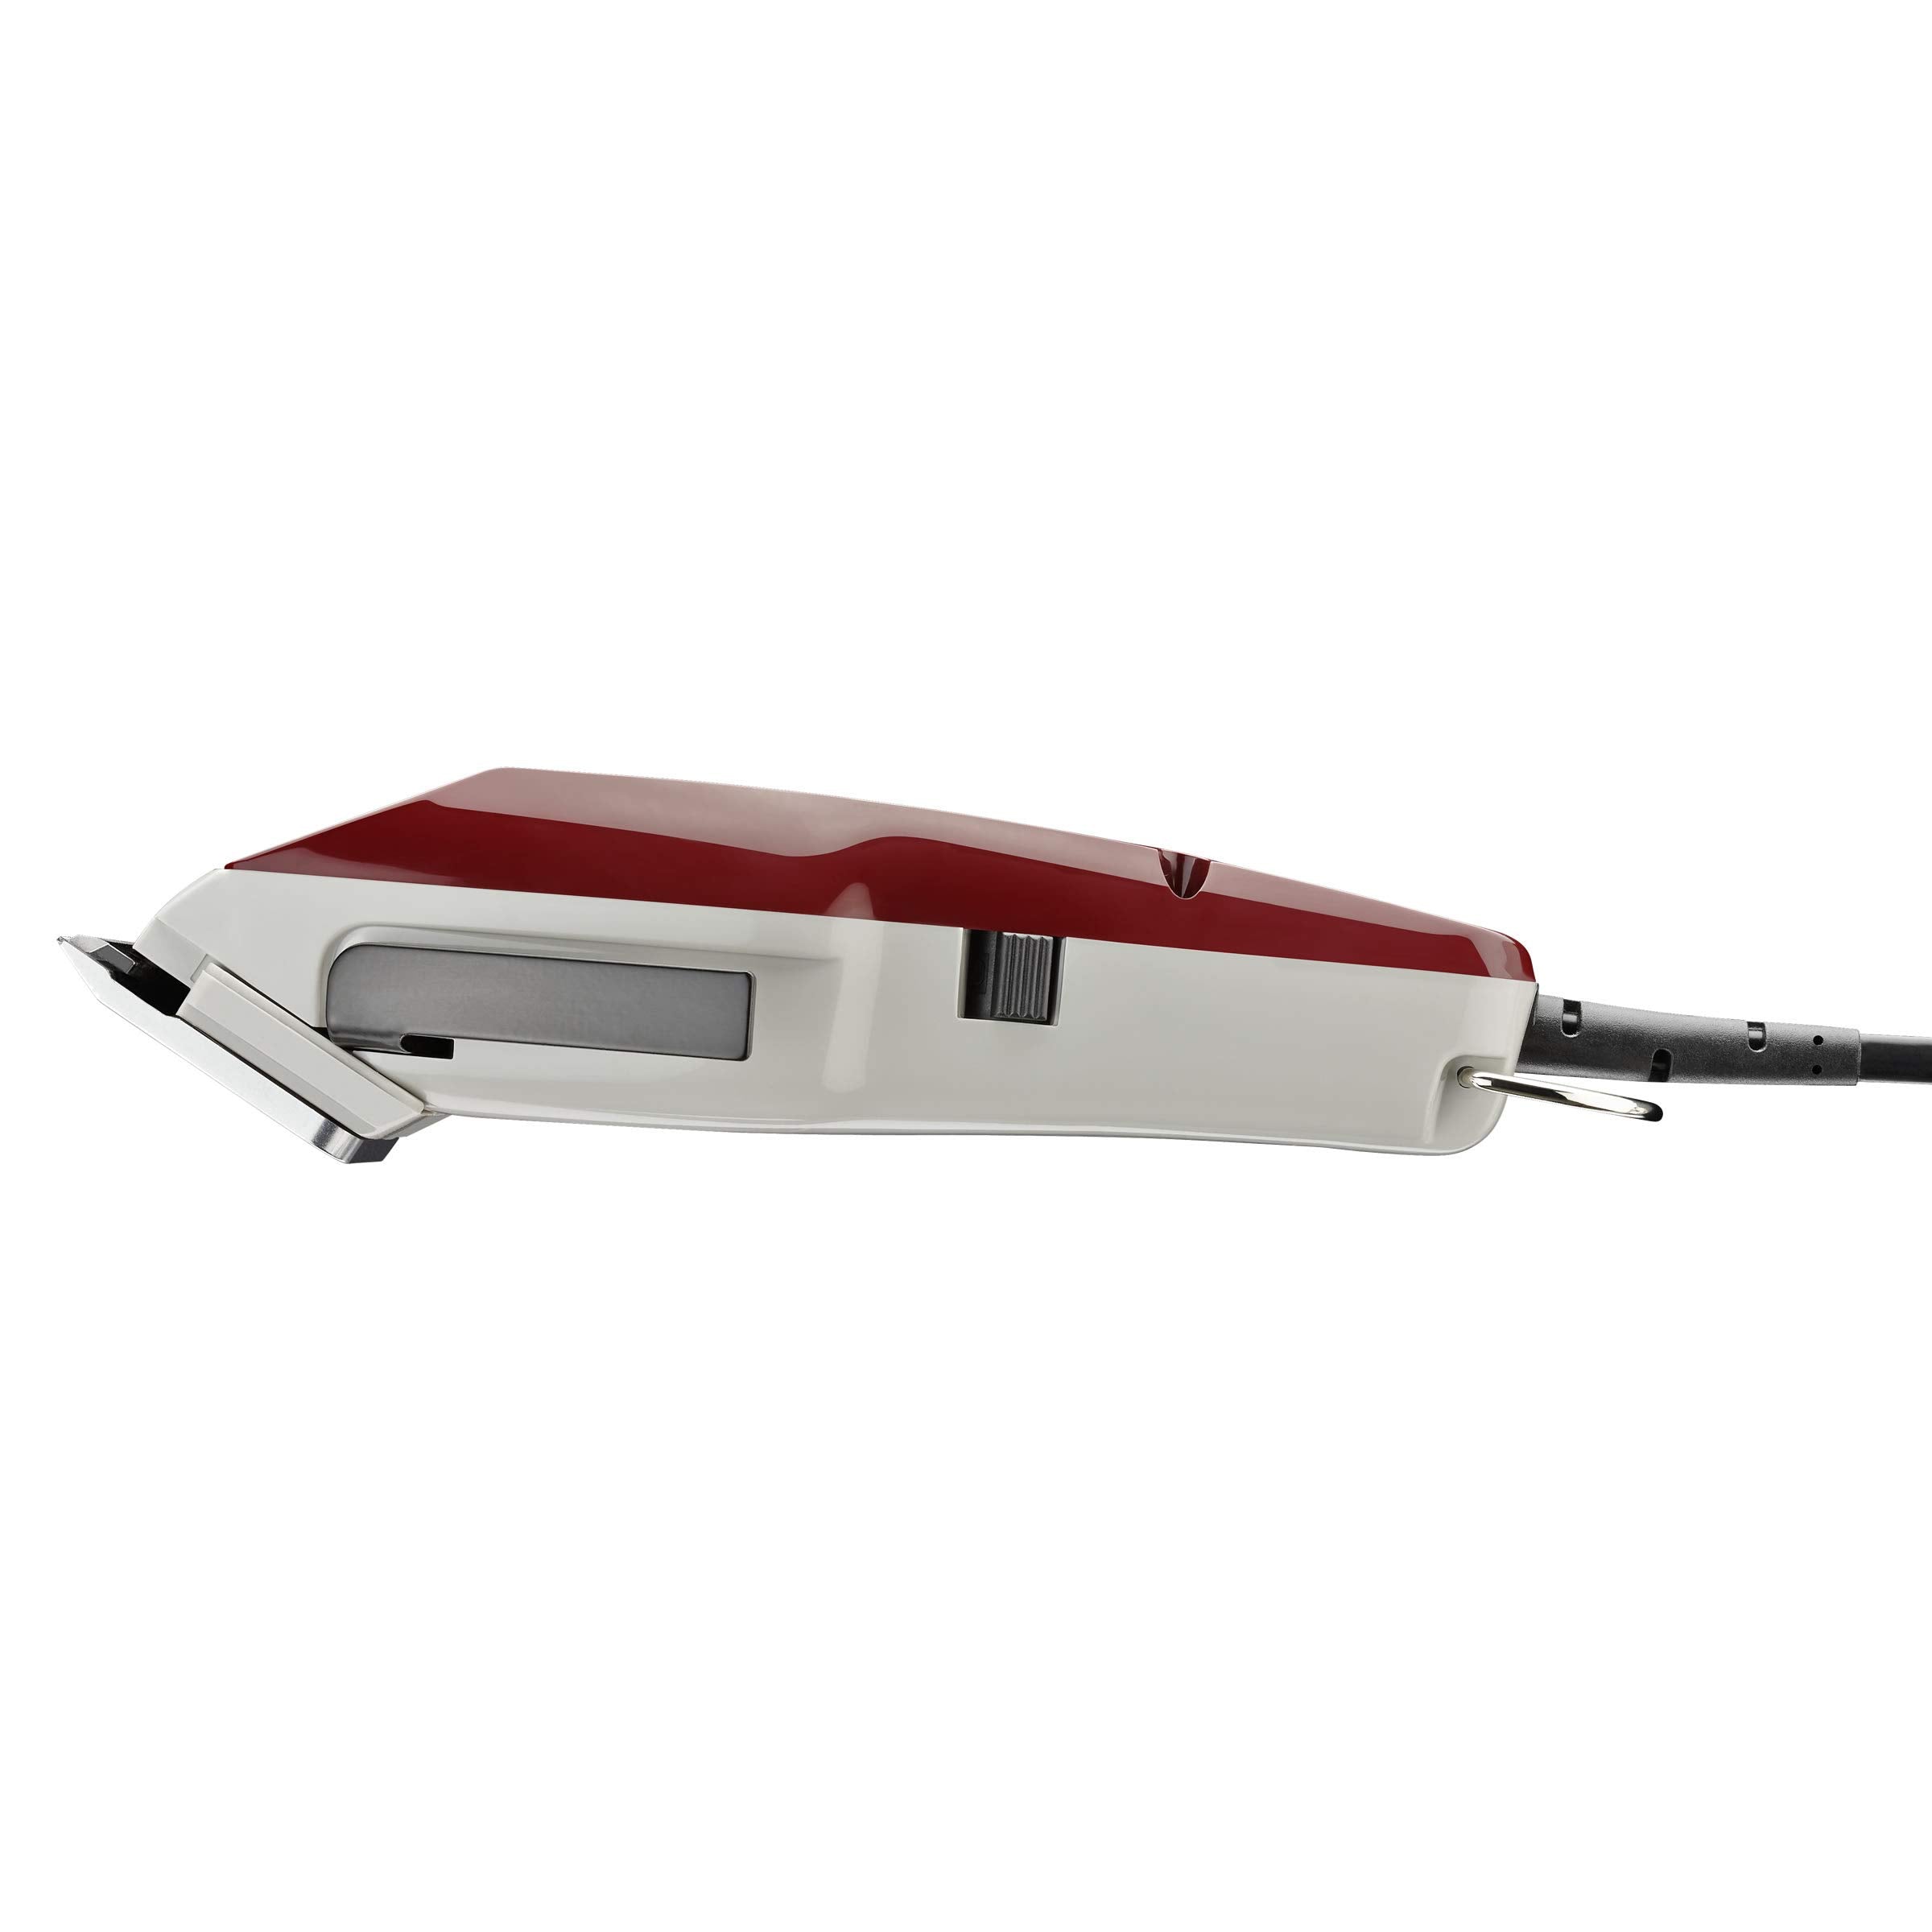 Moser 1400-0150, Professional Corded Hair Clipper, Burgandy (Pack Of 1)